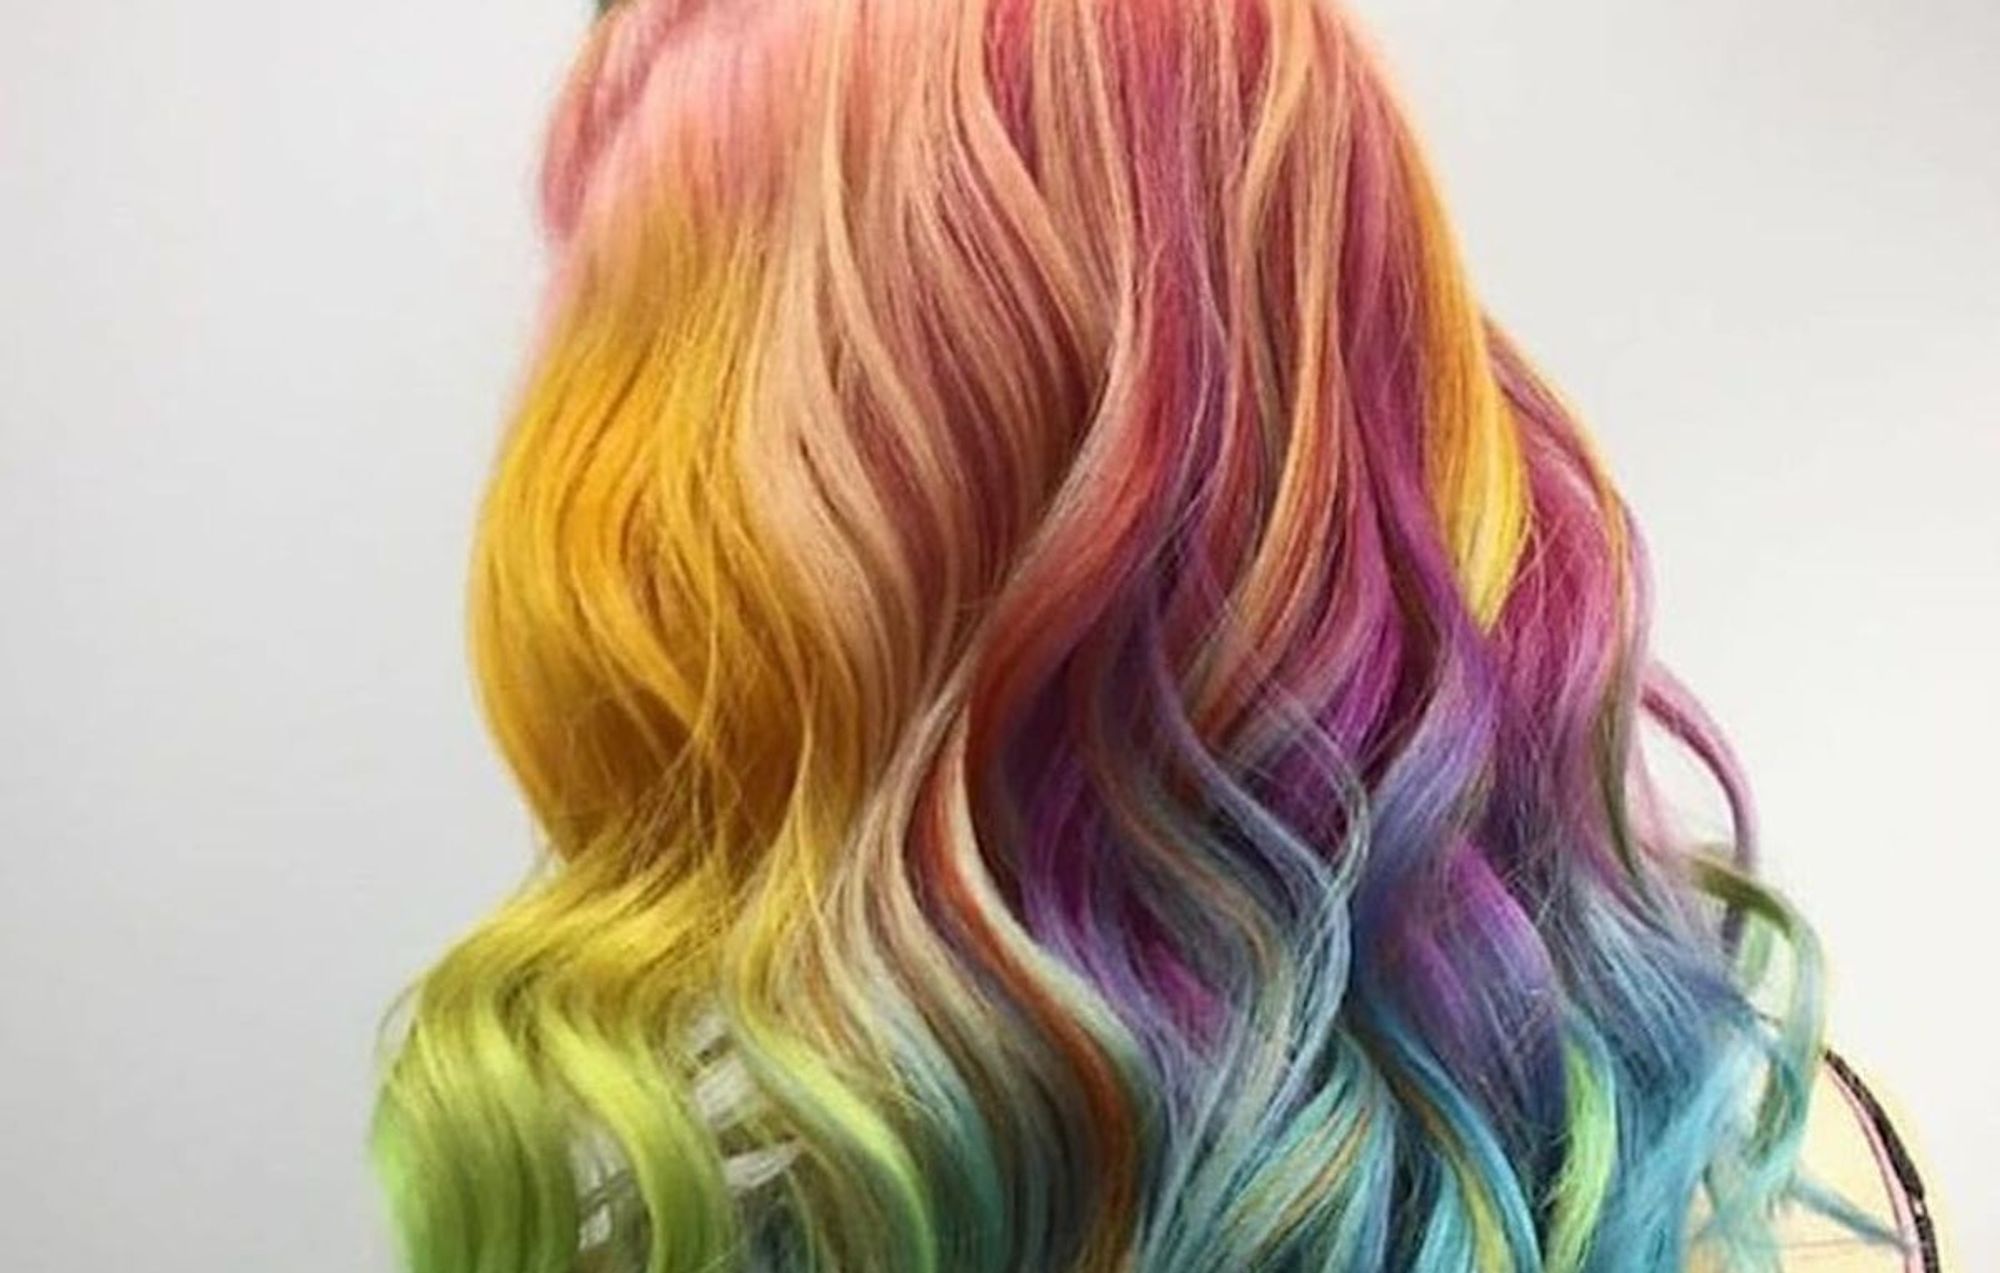 8. Hair Chalk Comb, Temporary Hair Color Dye for Blonde Hair - wide 10